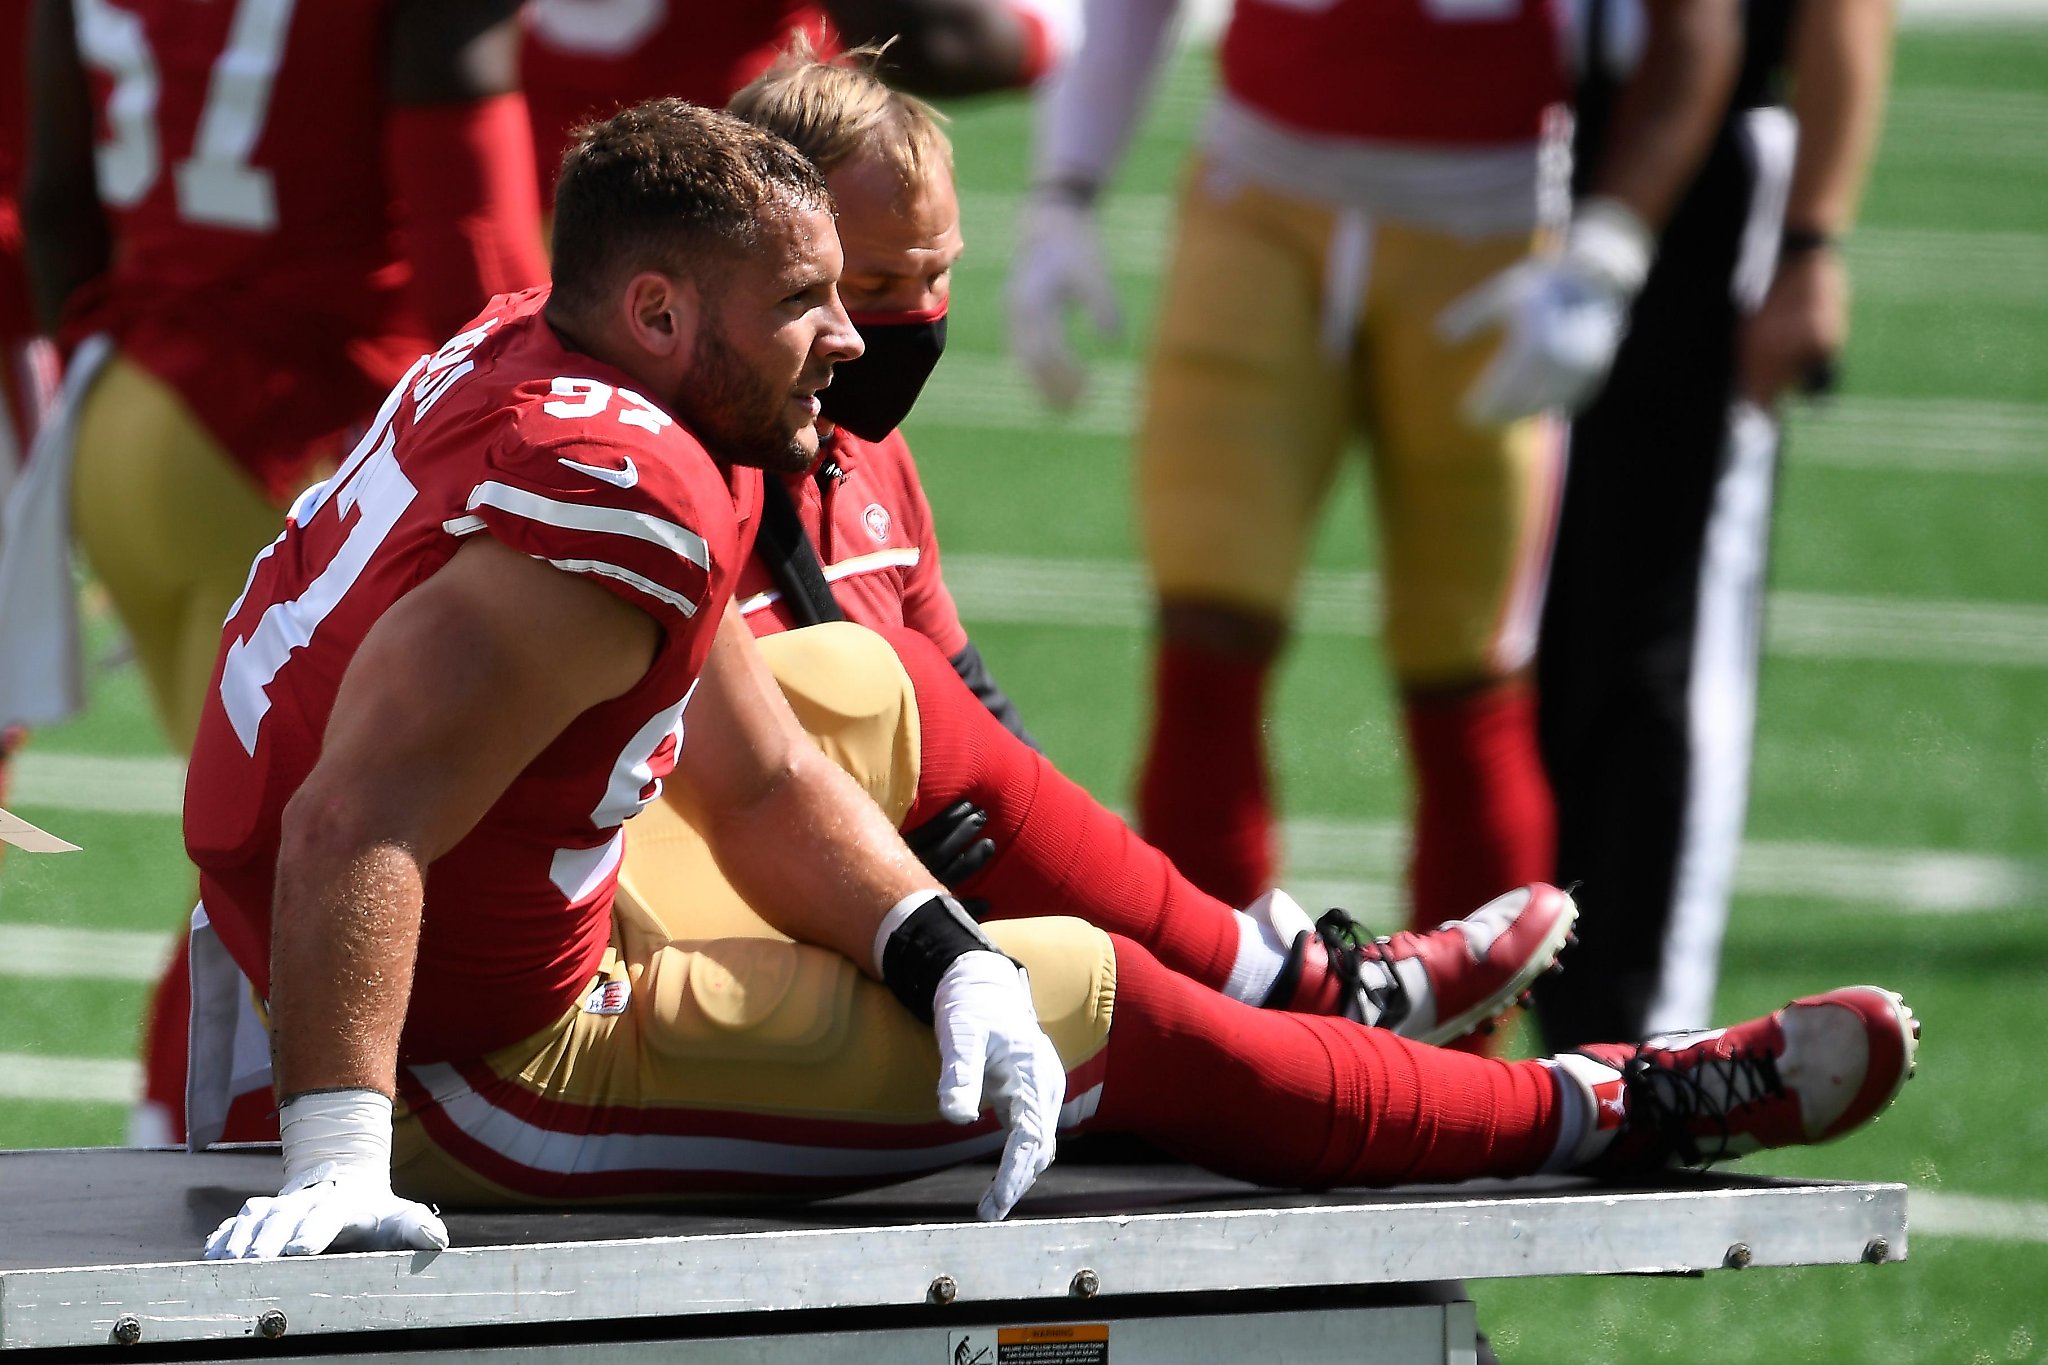 After an avalanche of injuries, Shanahan says 49ers are rethinking the “risk-reward” for players